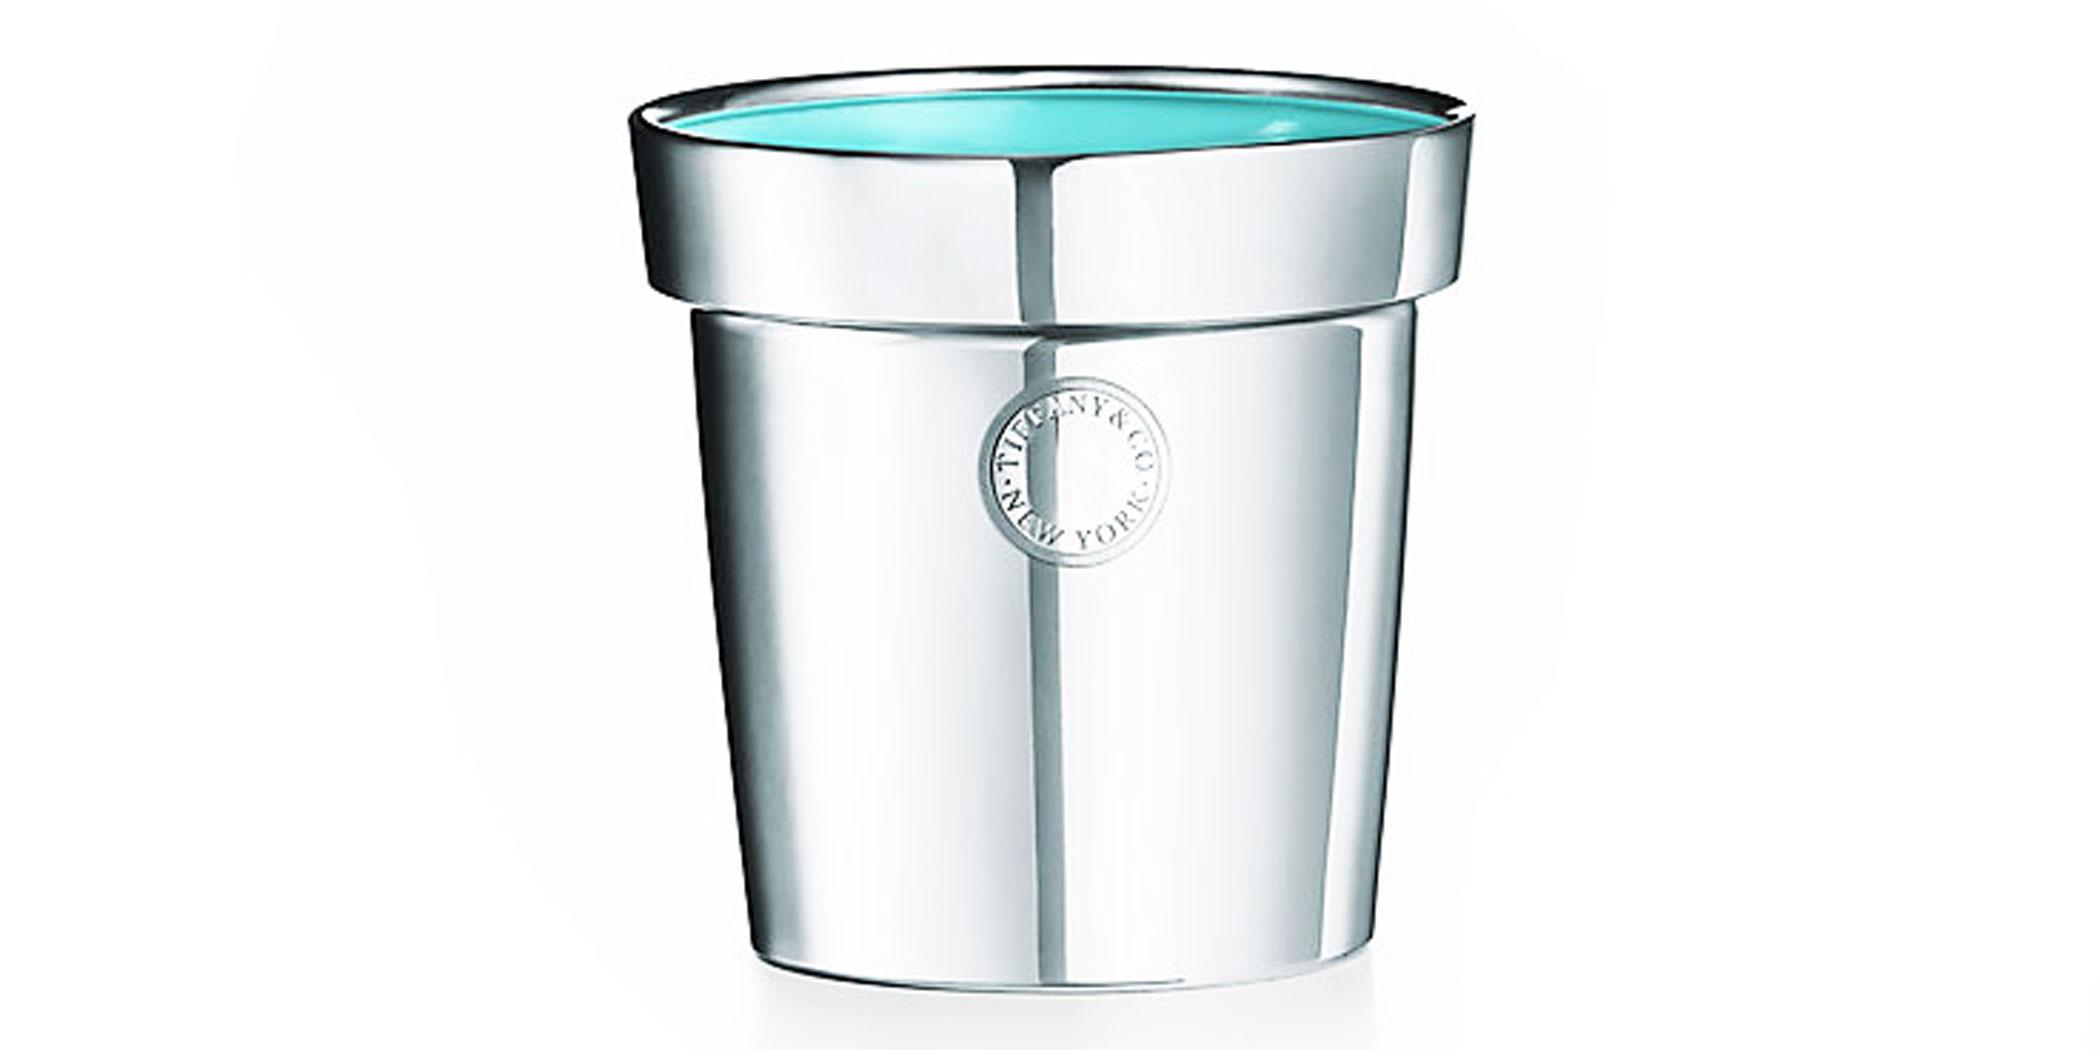 This sterling silver flowerpot from Tiffany 